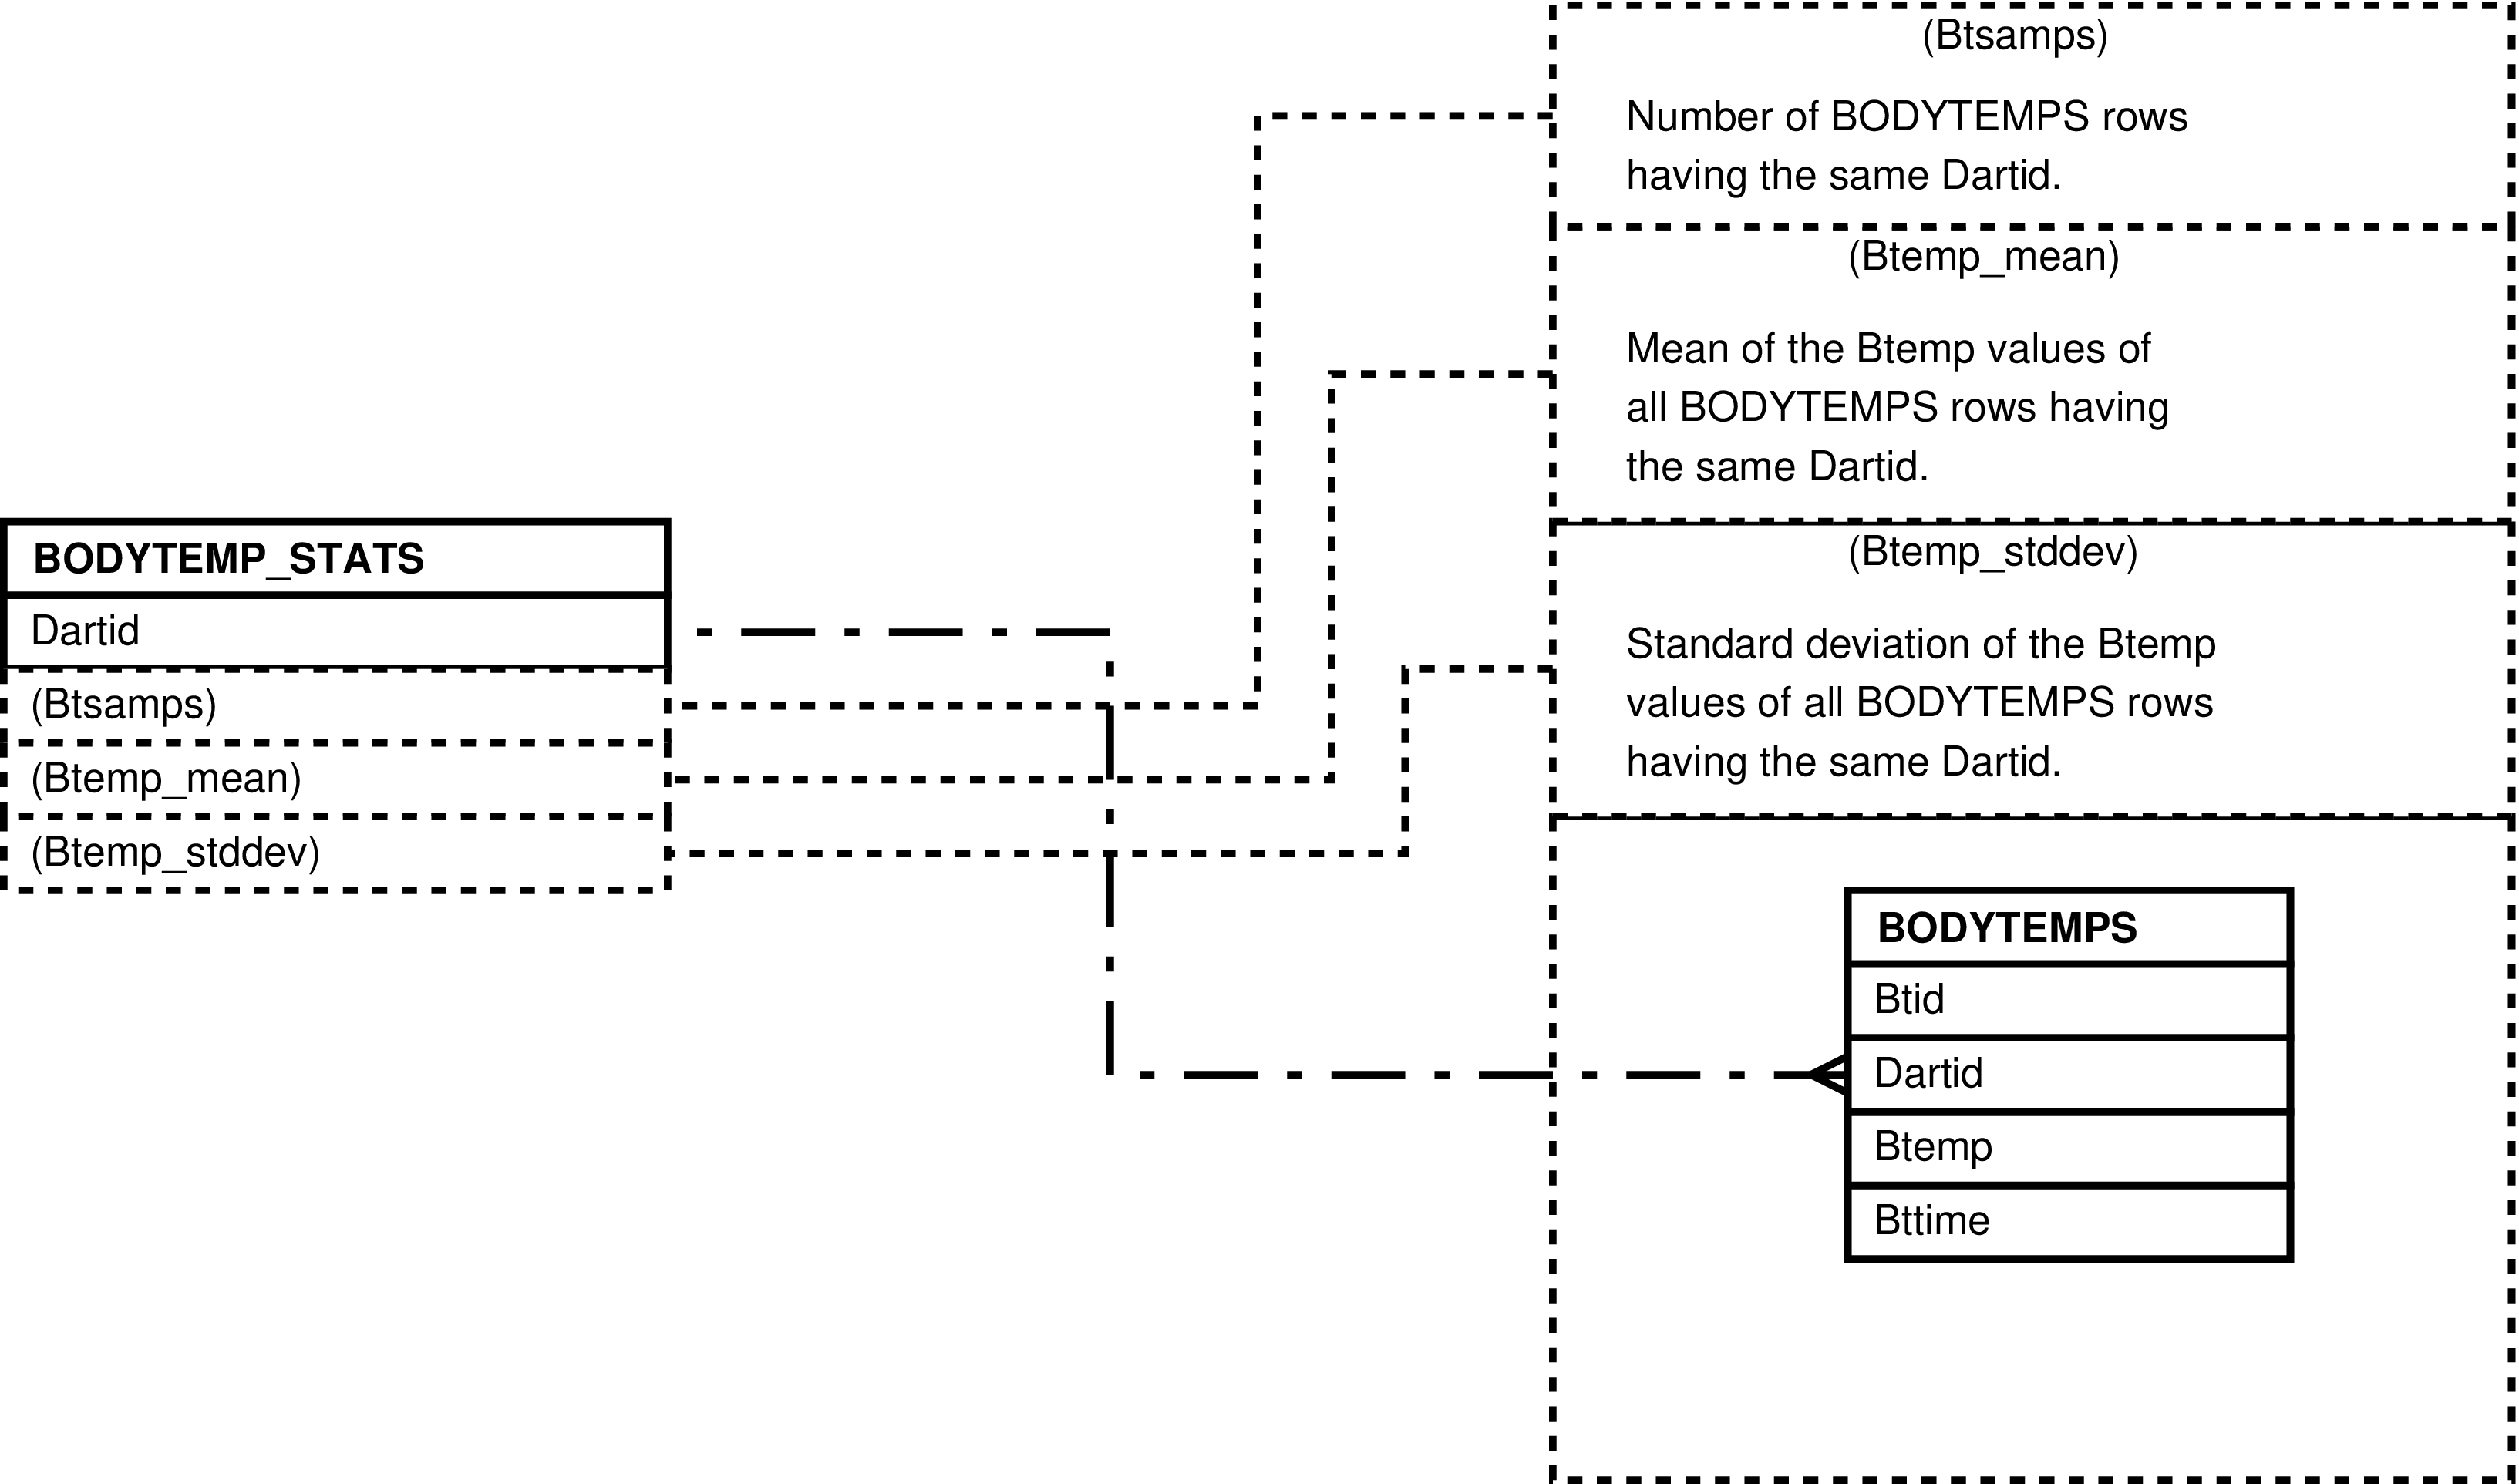 If we could we would display here the diagram showing how the BODYTEMP_STATS view is constructed.